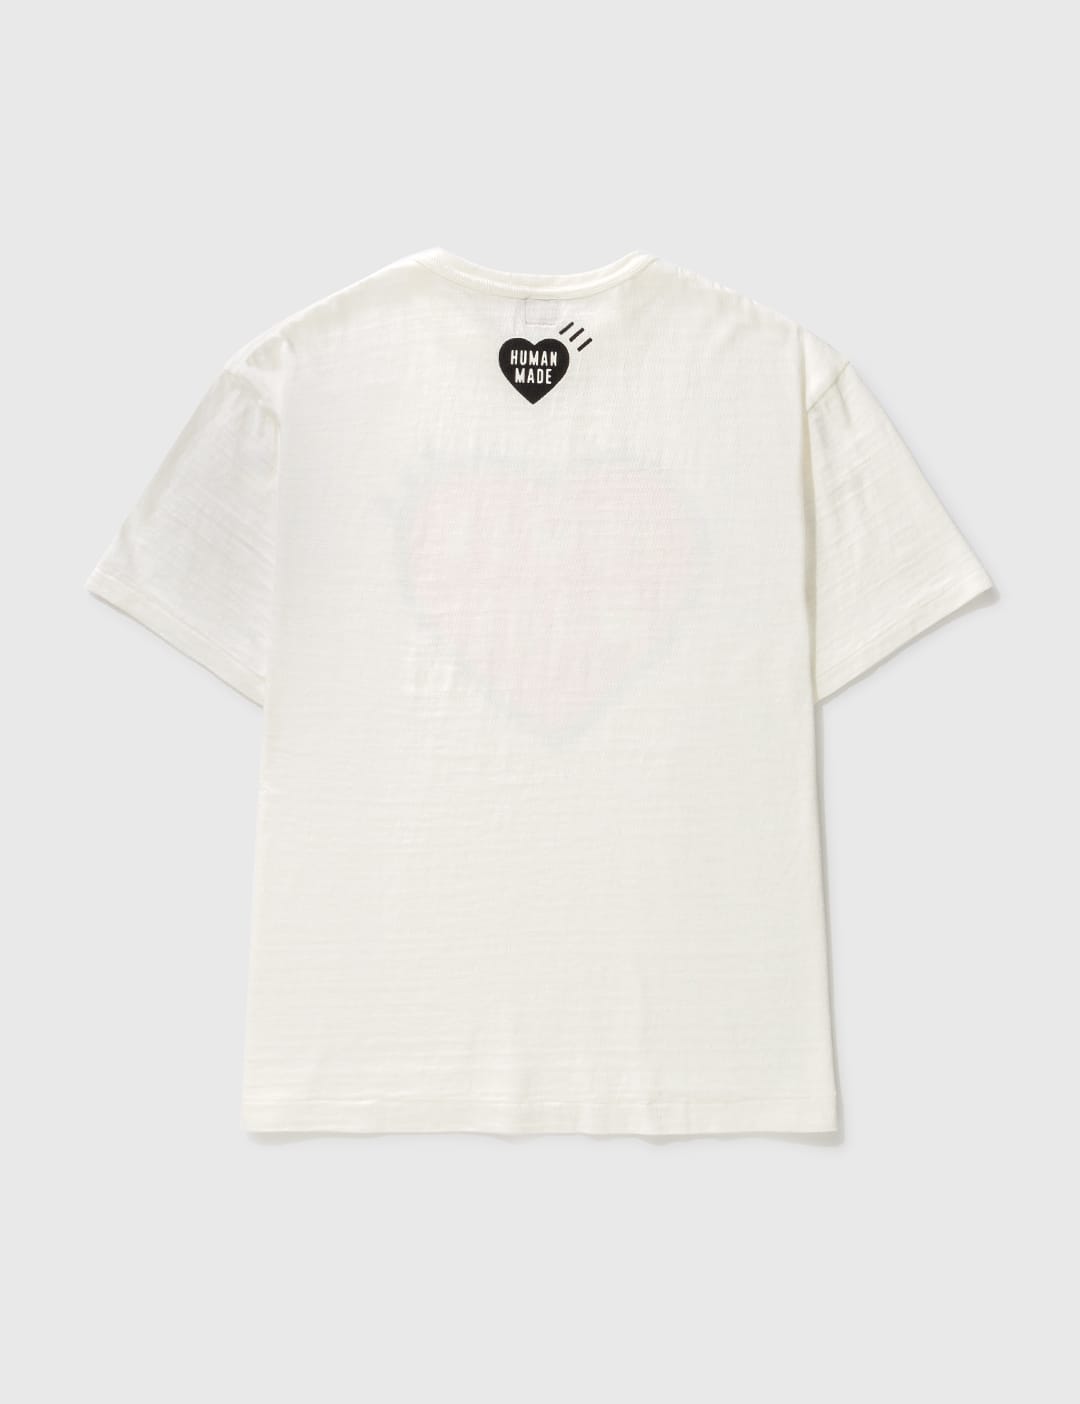 Human Made - Graphic T-shirt #12 | HBX - Globally Curated Fashion 